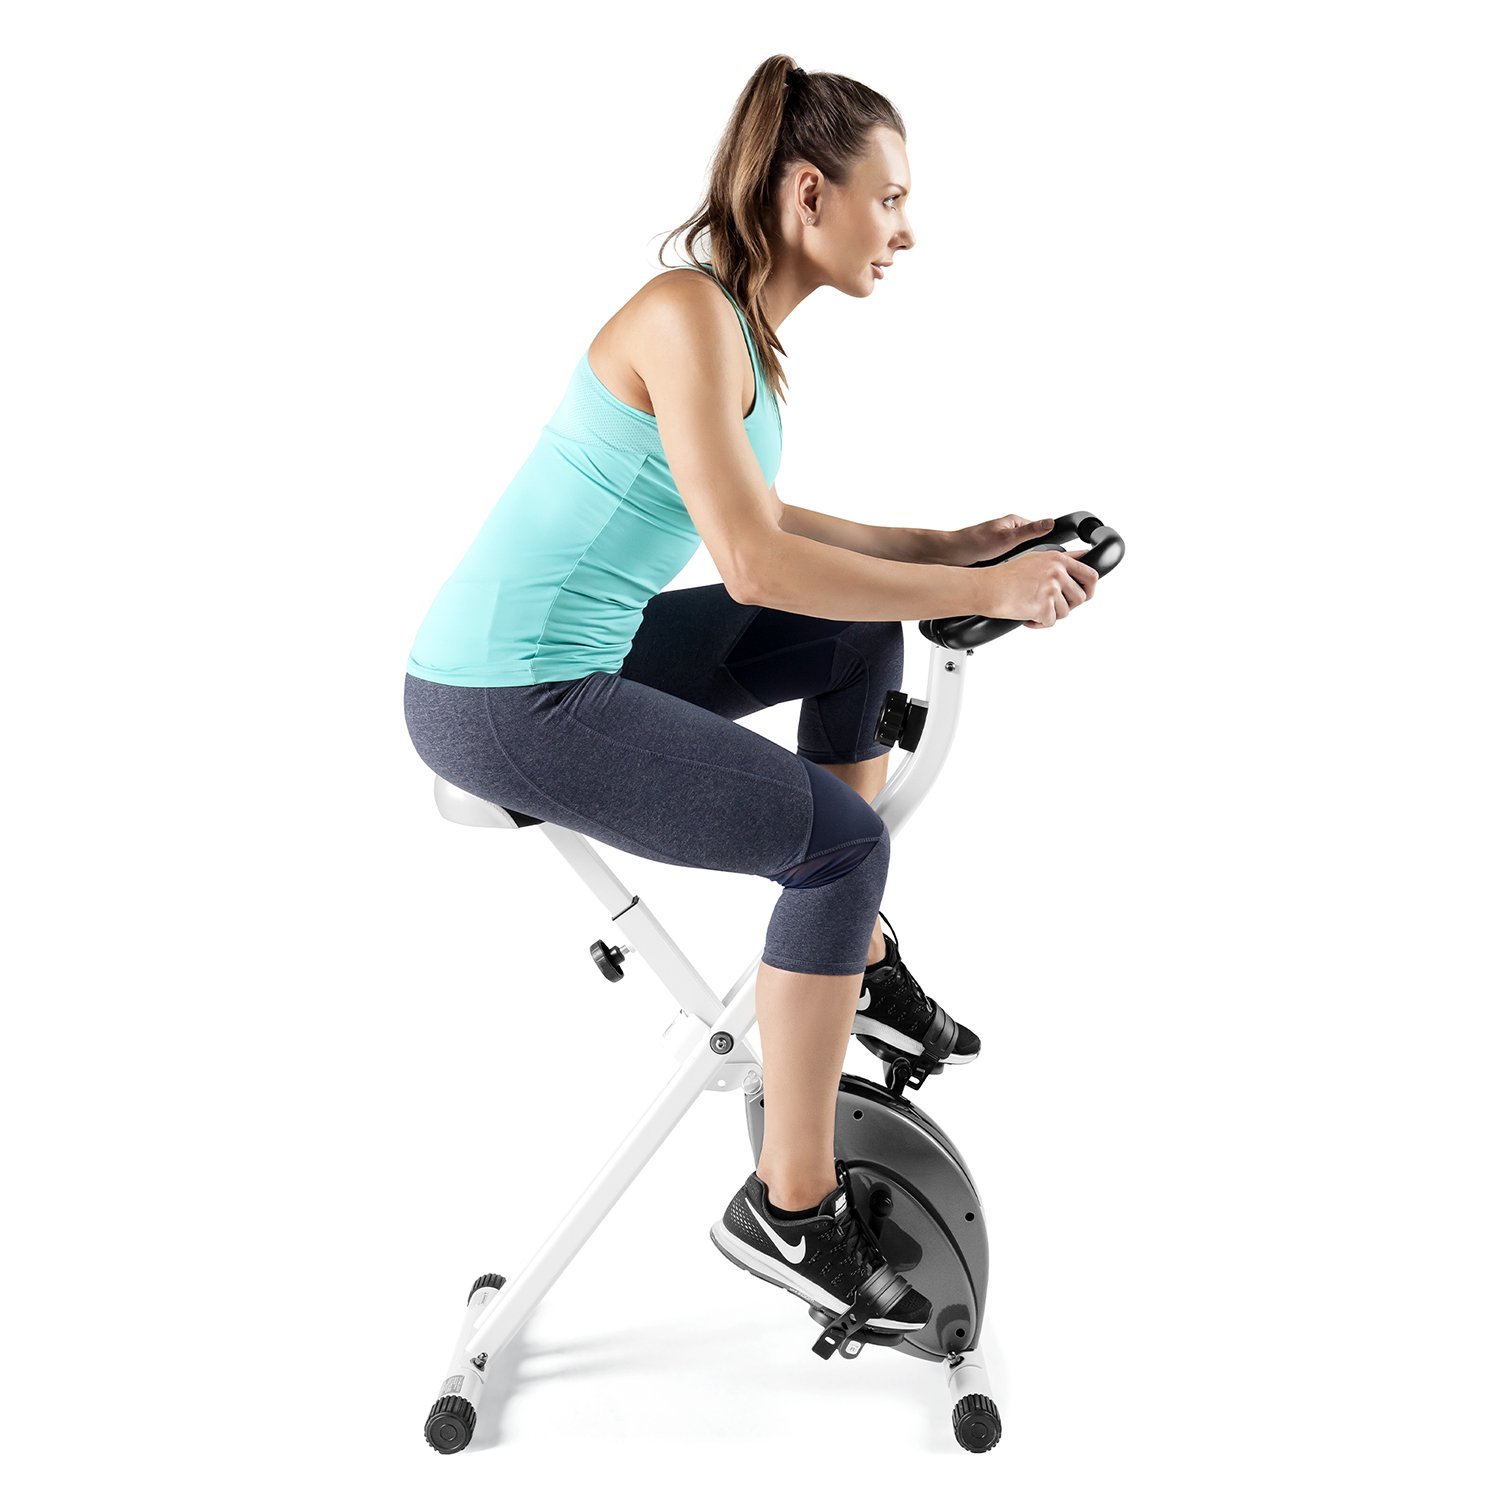 Marcy Foldable Exercise Bike Compact Cycling NS-652 - image 6 of 8